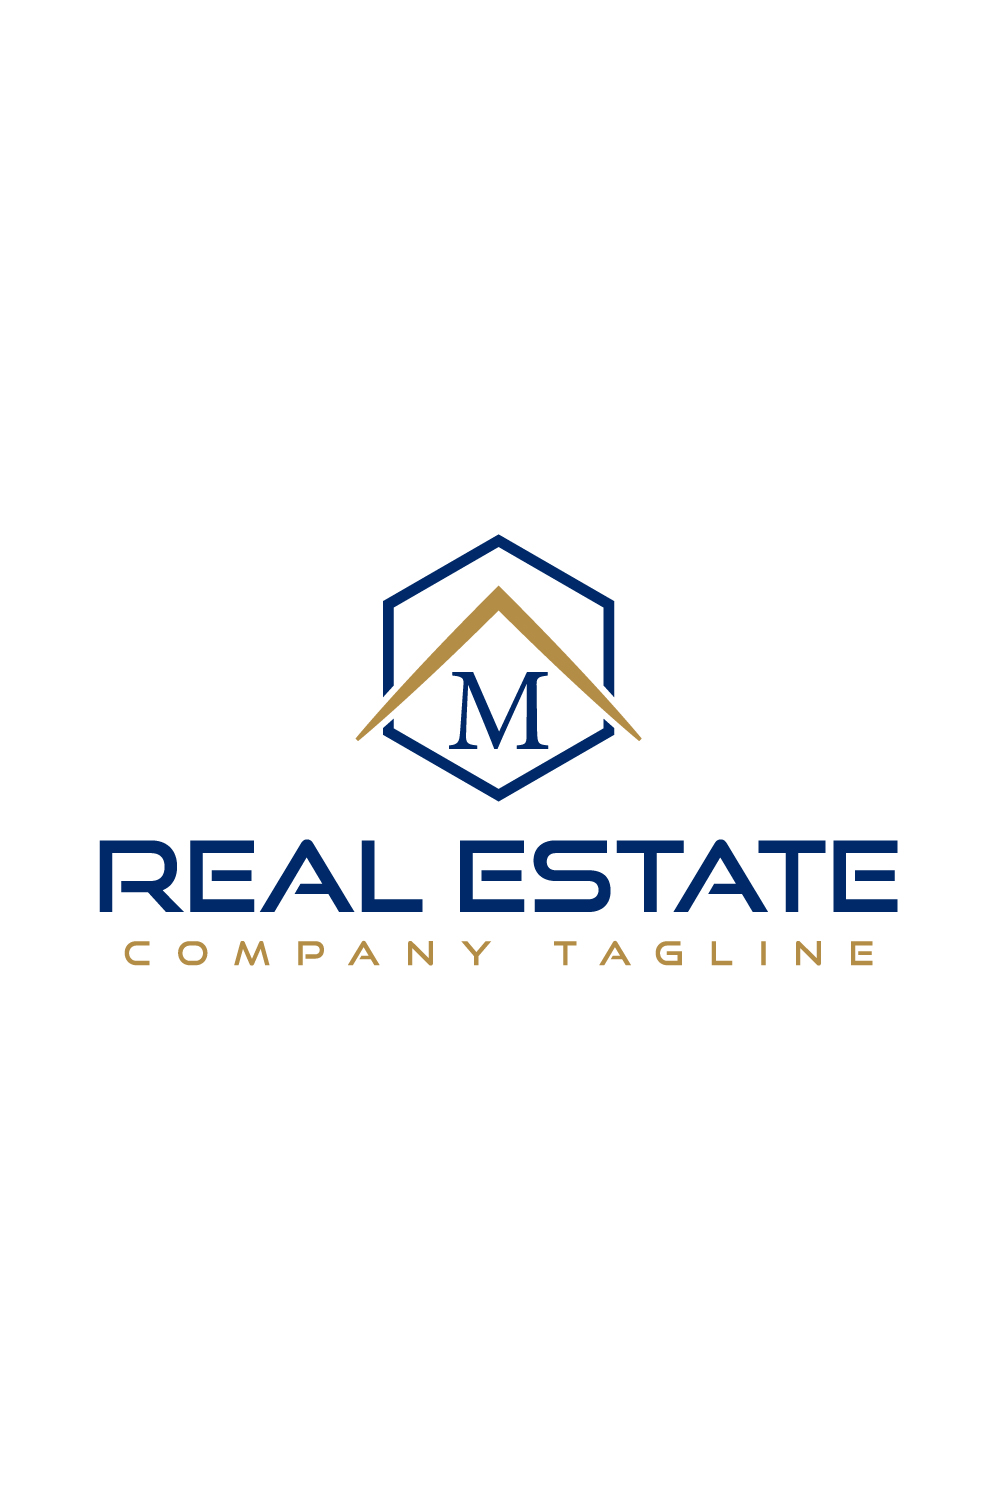 Real estate logo with golden, dark blue color and letter M pinterest preview image.